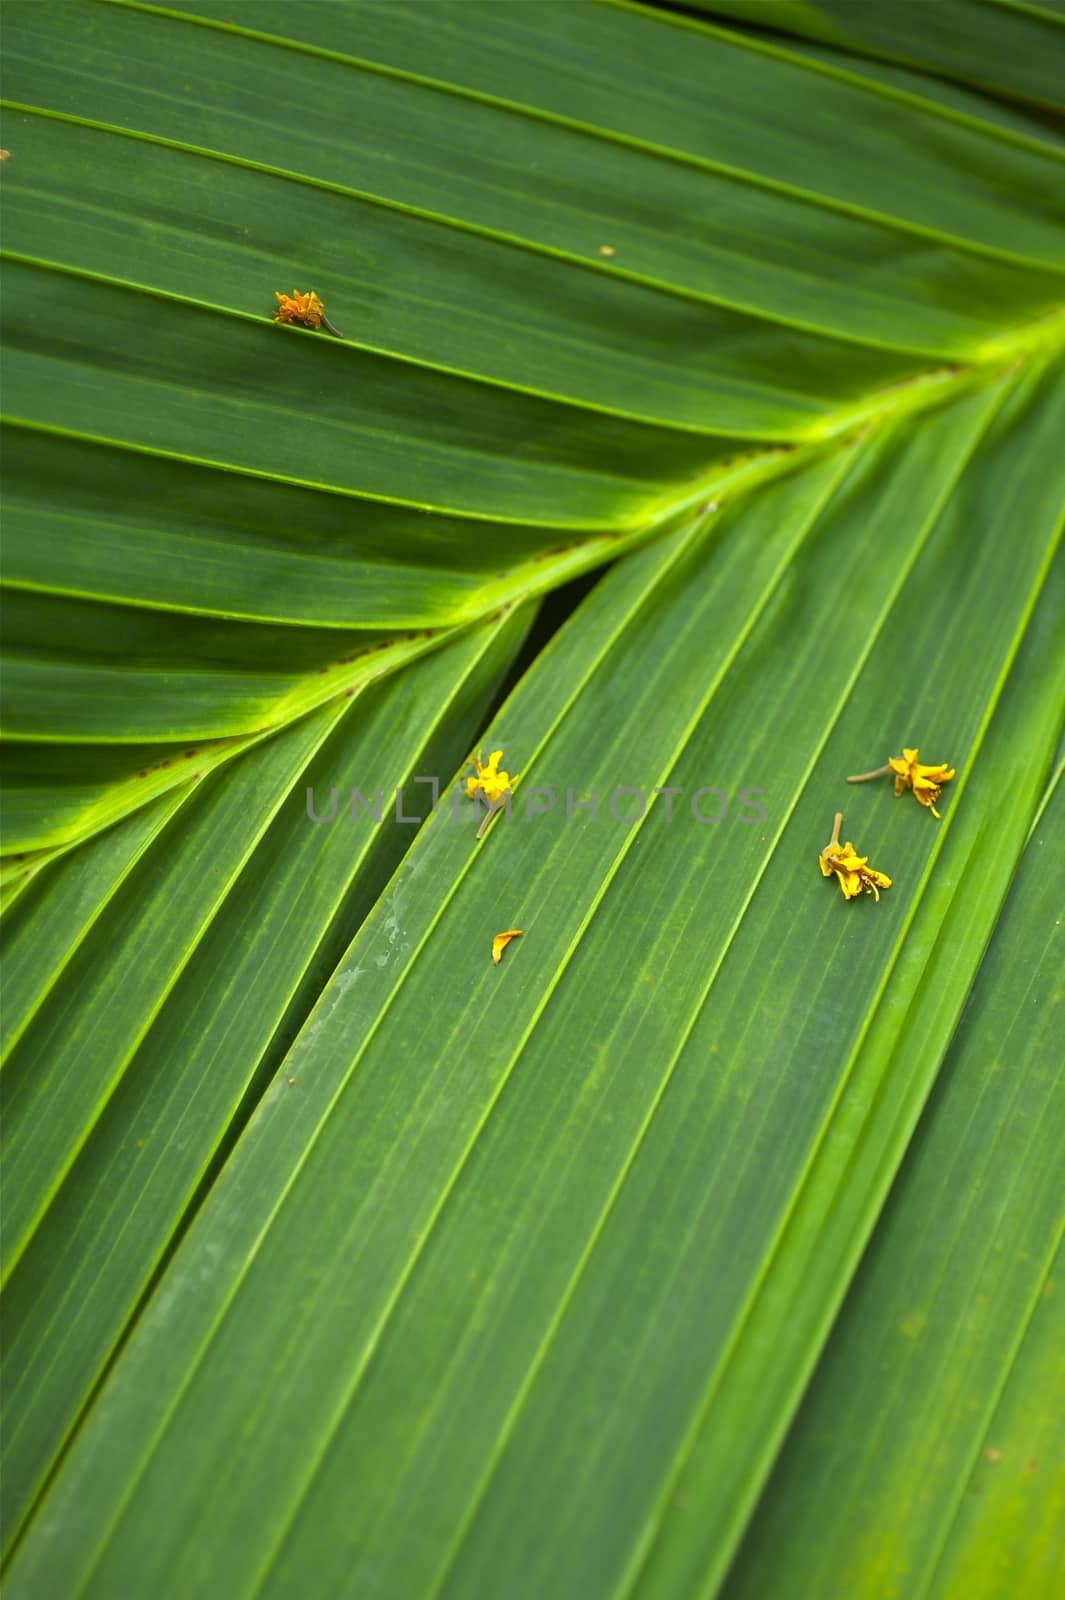 Tropical Palm Leaf Nature Background. Vertical Photo of Palm Leaf. Green Organic and Natural Background.